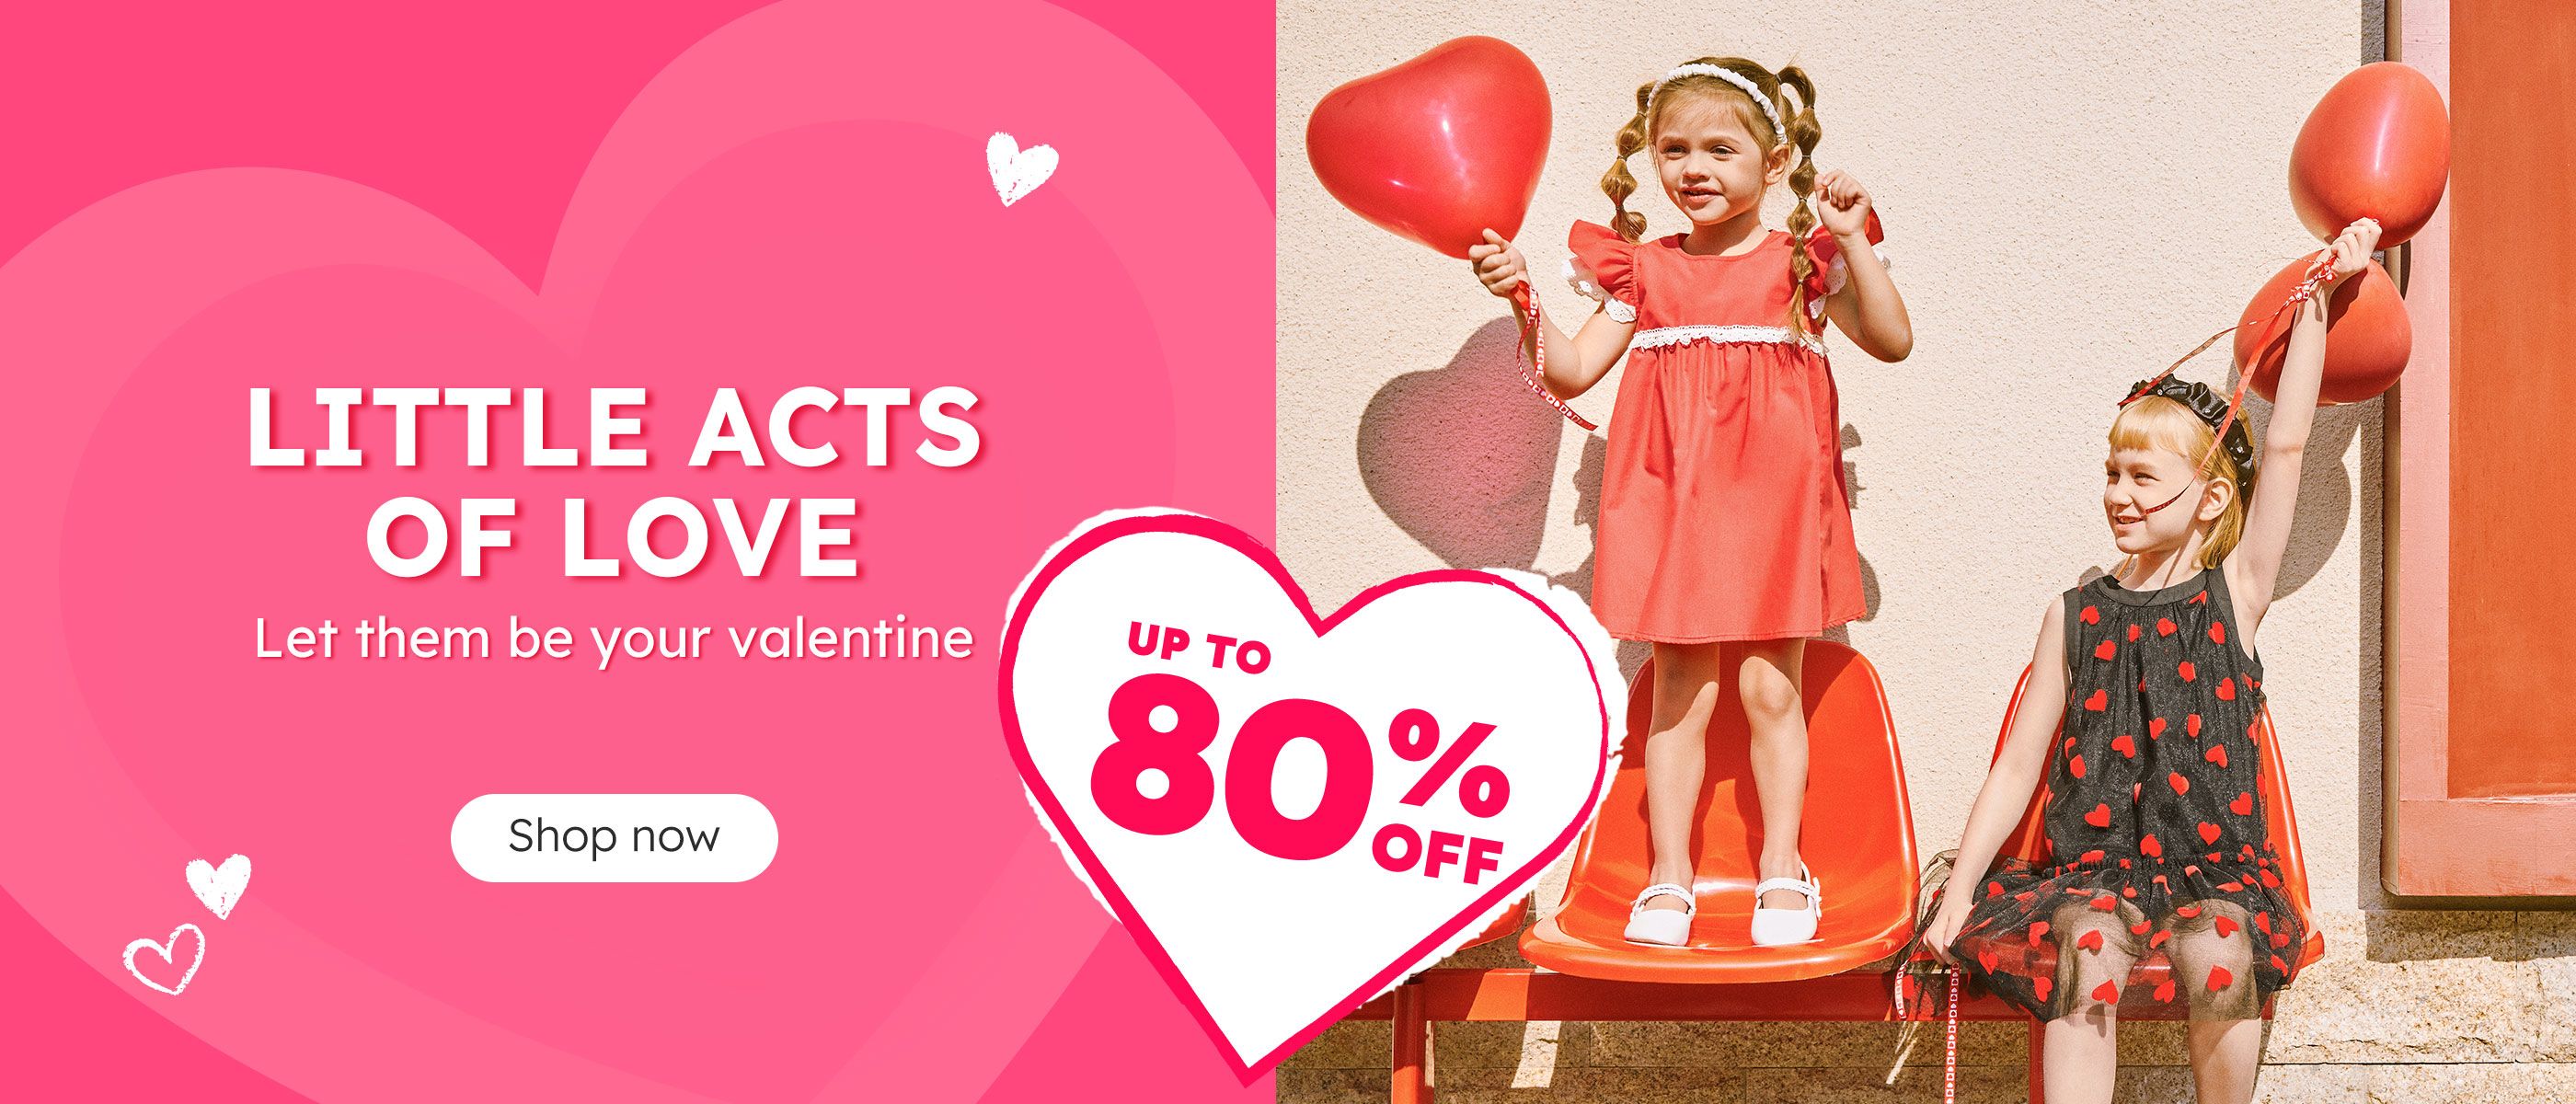 Click it to join Valentine activity